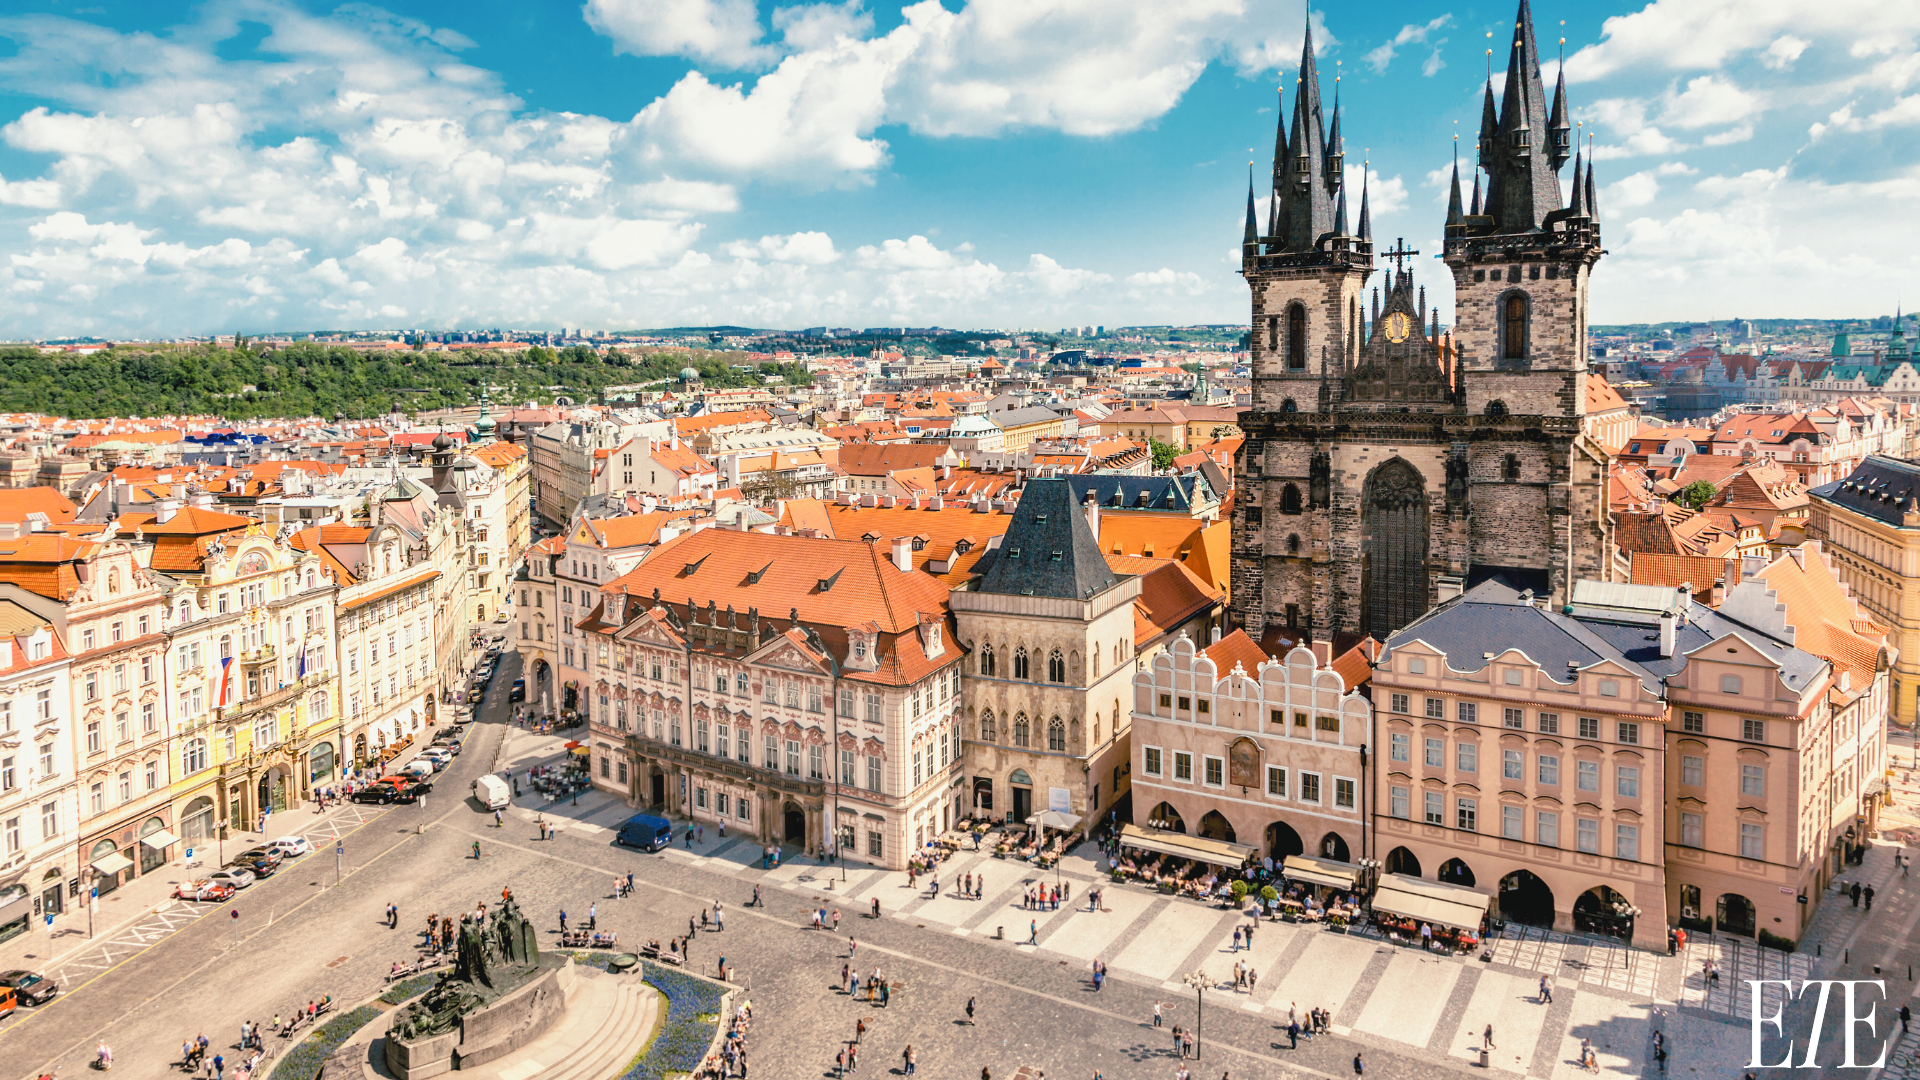 Find popular sites of Prague with this guide